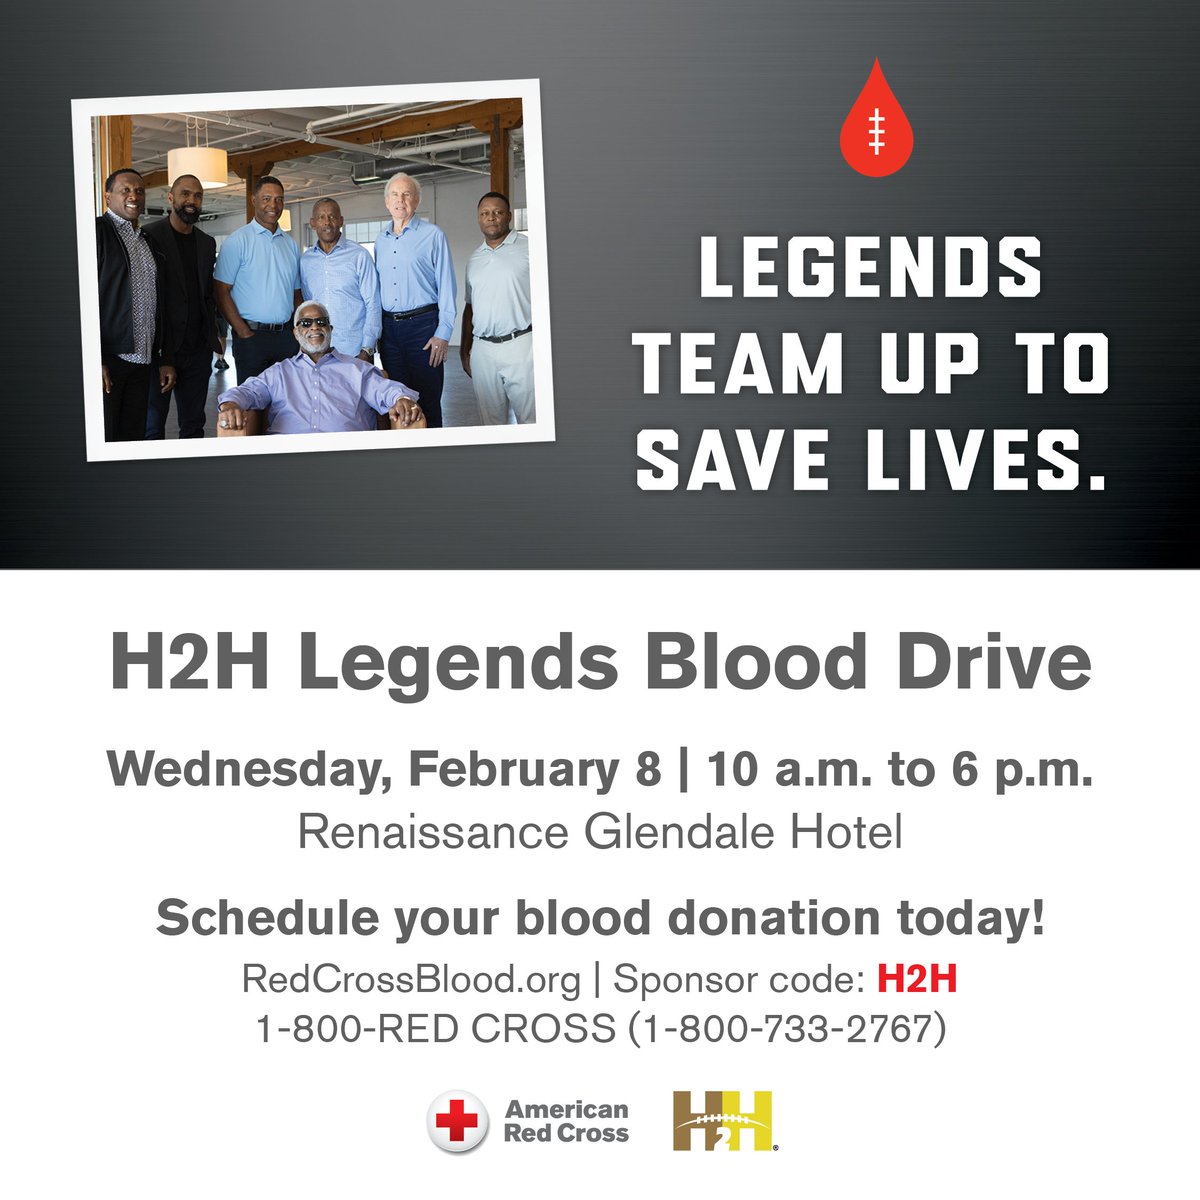 Make sure to join me and a few other @h2hlegends as we team up with the #RedCross for the H2H Blood Drive in Phoenix, AZ on 2/8. 

You'll have chance to score a custom autographed helmet, meet #H2HLegends & get a limited-edition shirt. 

Sign up now: rcblood.org/H2HLegends